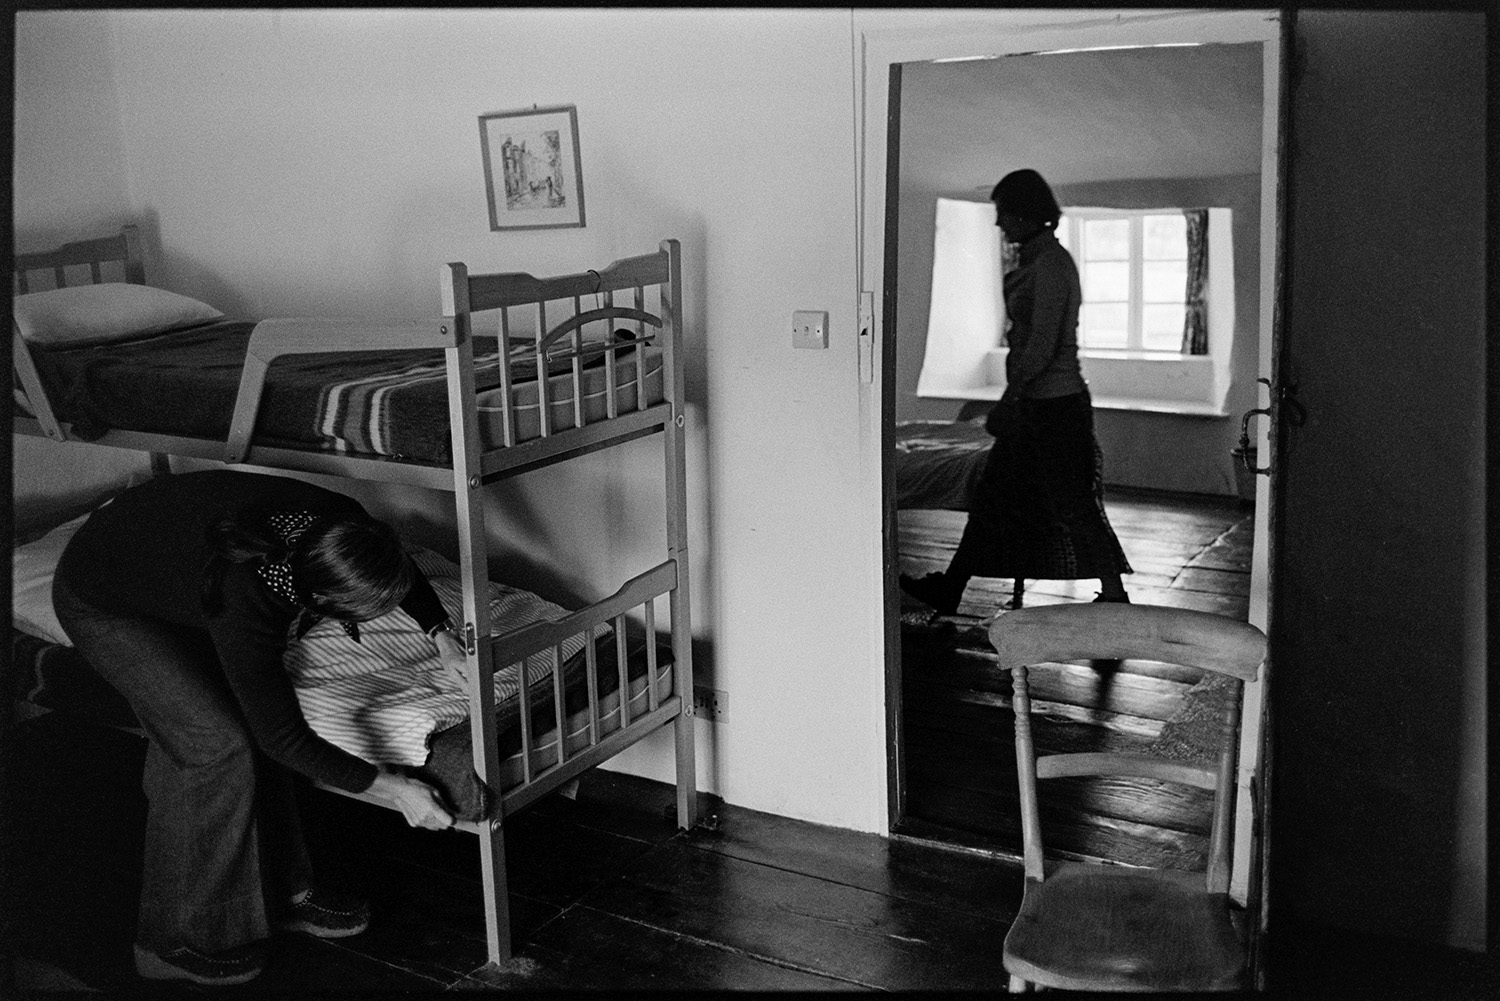 Farmhouse used as creative writing centre. 
[A person making the bottom bed of a bunk bed at the Arvon centre at Totleigh Barton, Sheepwash. A woman is walking past the open doorway to the bedroom. The farmhouse was used as a creative writing centre.]